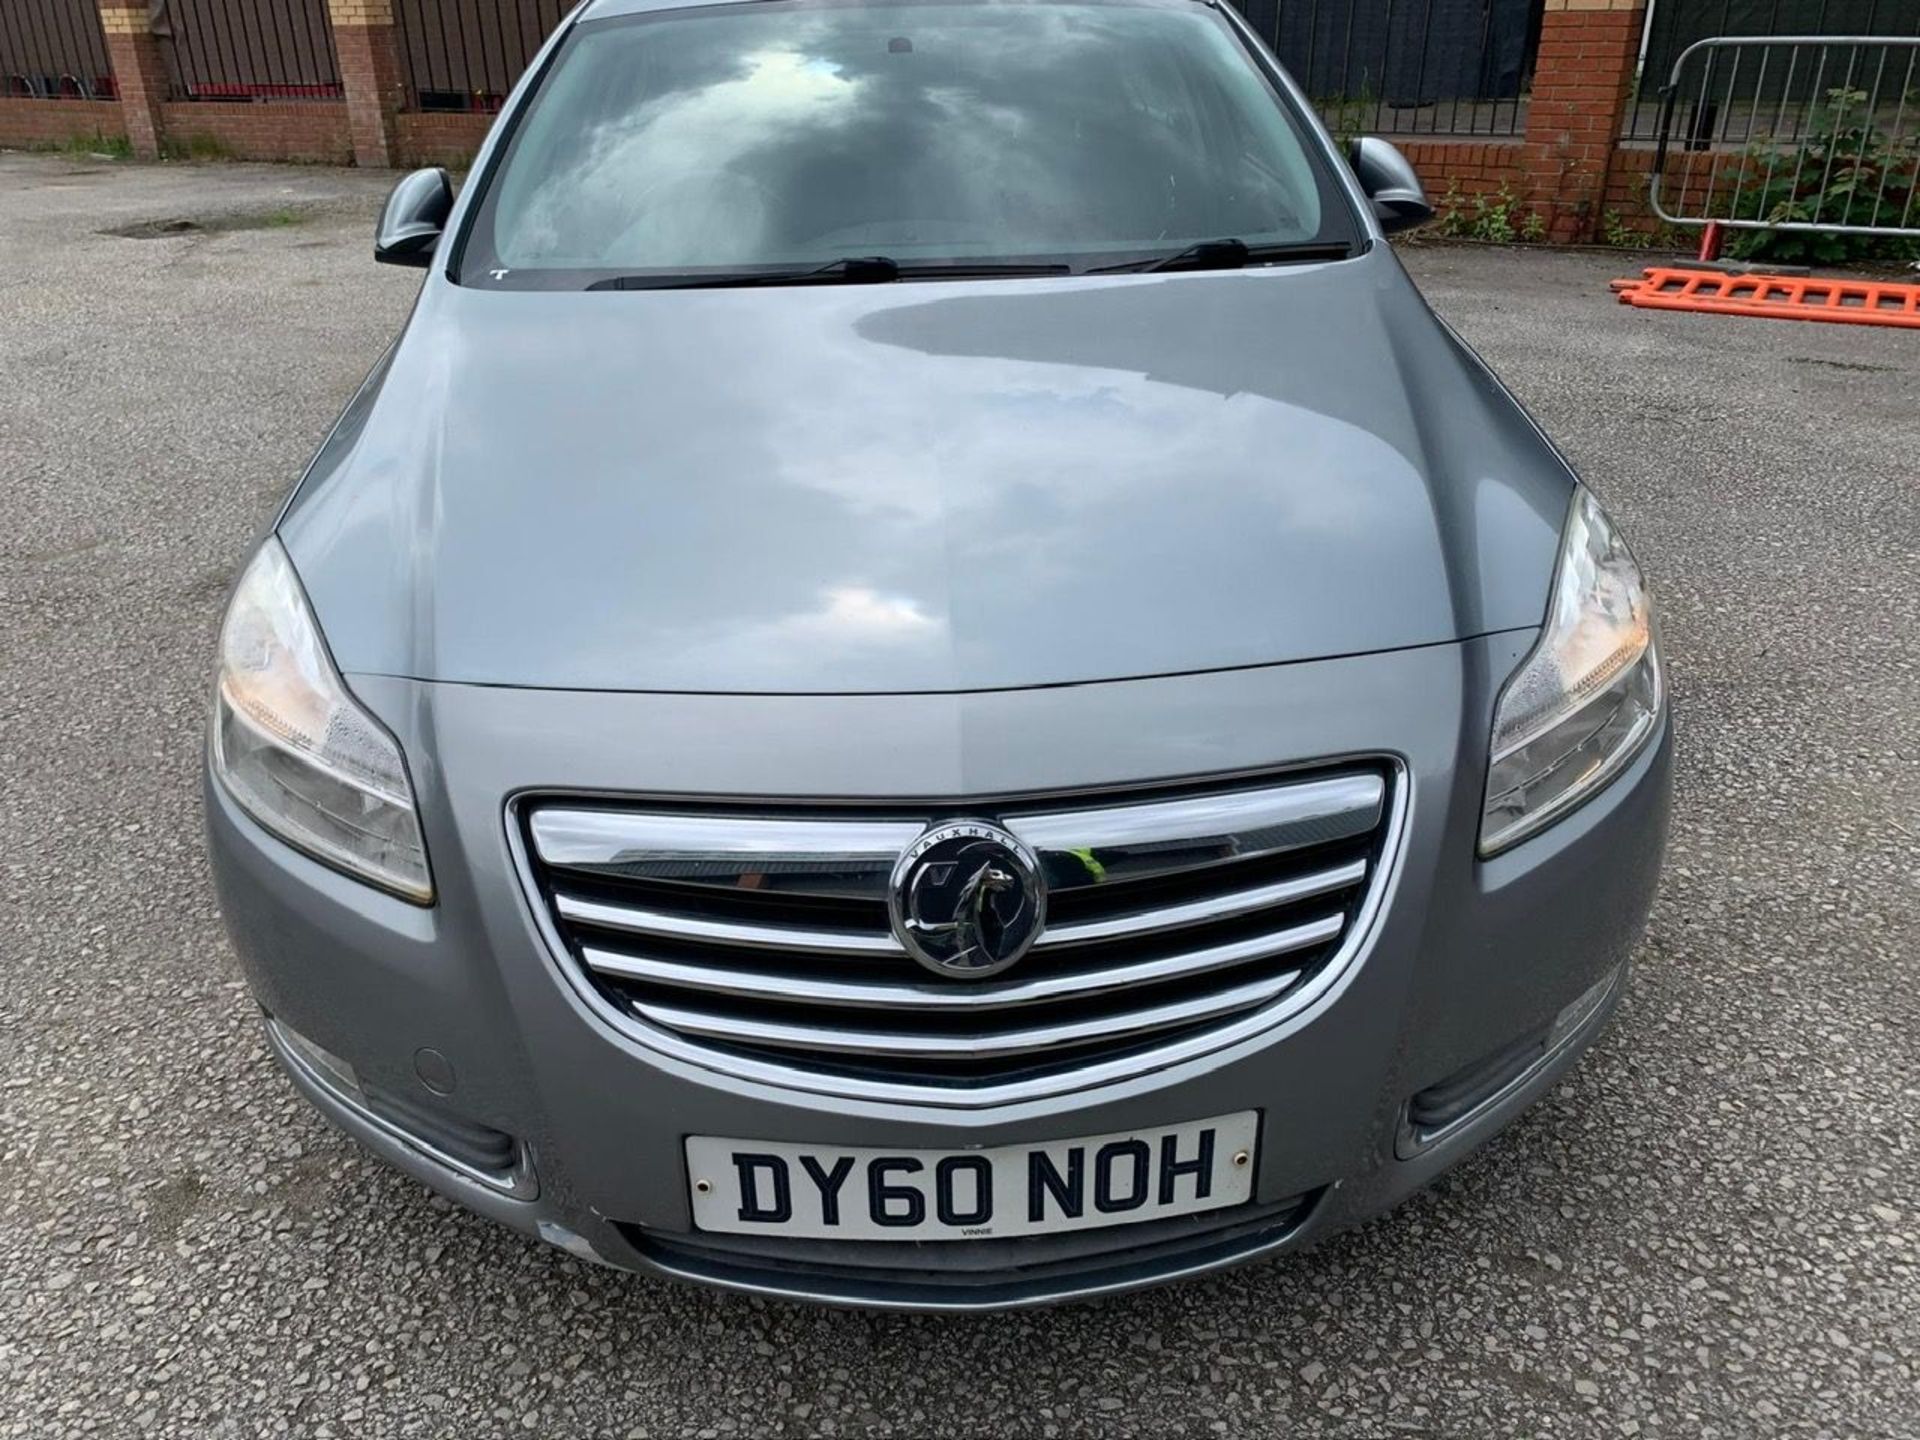 DY60 NOH VAUXHALL INSIGNIA Silver Diesel First Registration: 21.09.10 Mot: 23.01.25 Mileage: 122,856